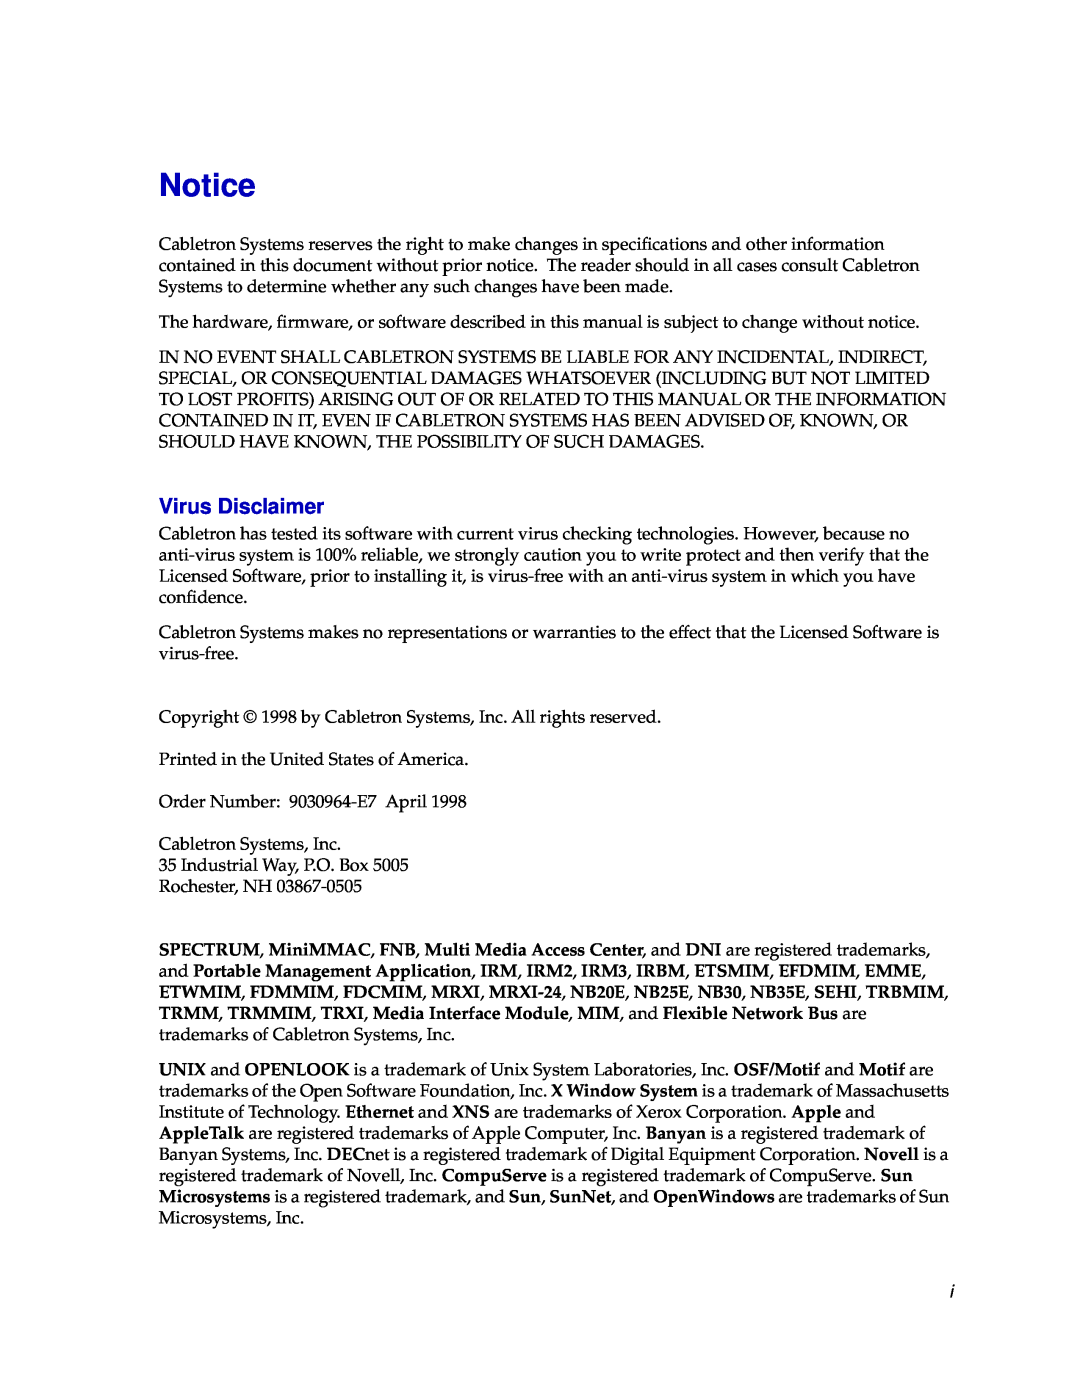 Cabletron Systems EMM-E6 manual Virus Disclaimer 